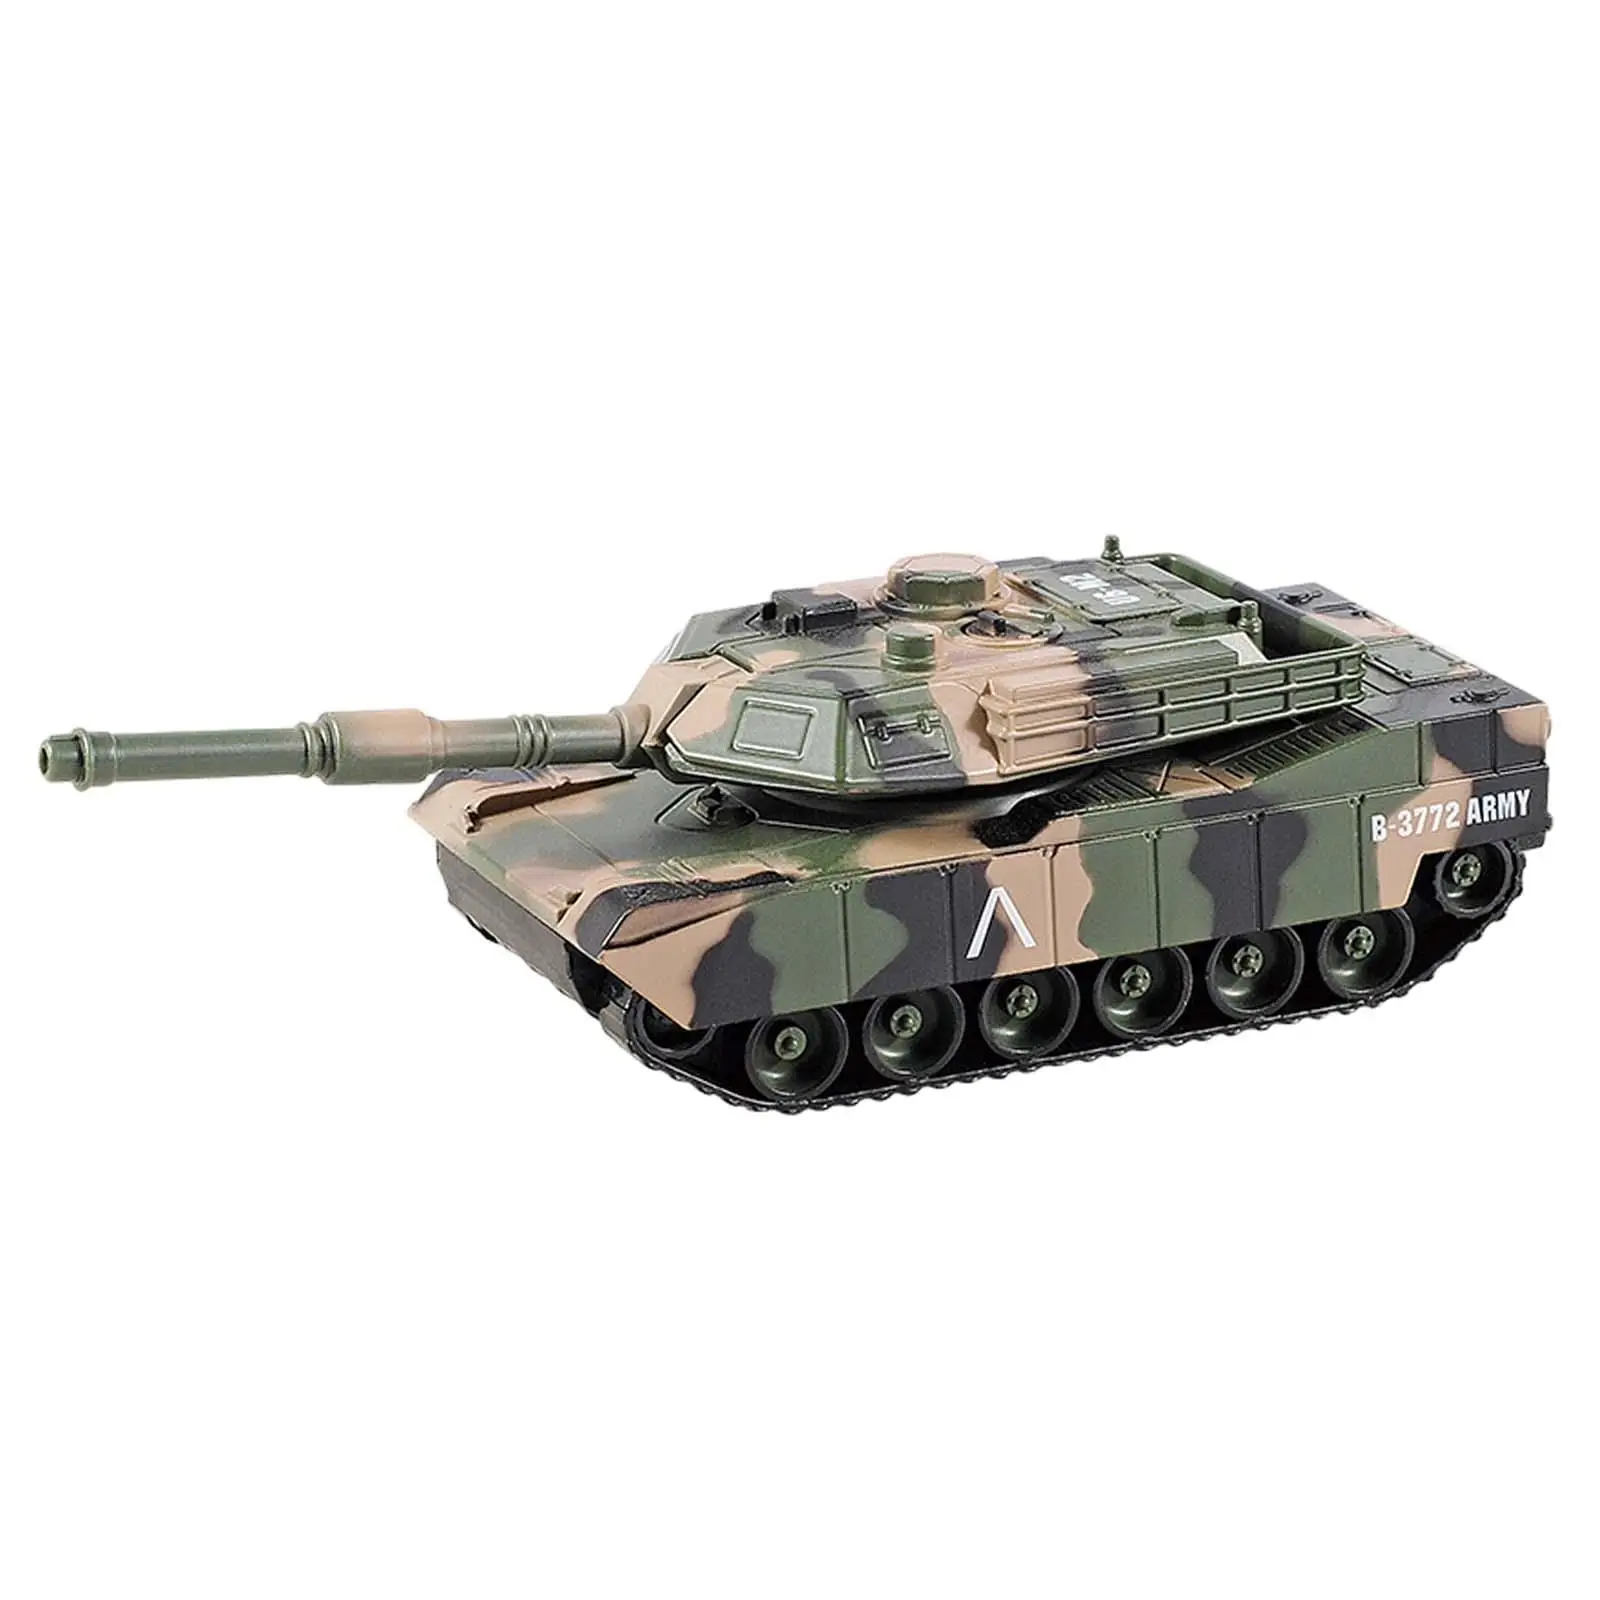 1/24 Scale Tank Toy with Light and Sound Educational Toys Vehicle Pull Back Tank Toy Vehicle for Kids Boys Girls Birthday Gift